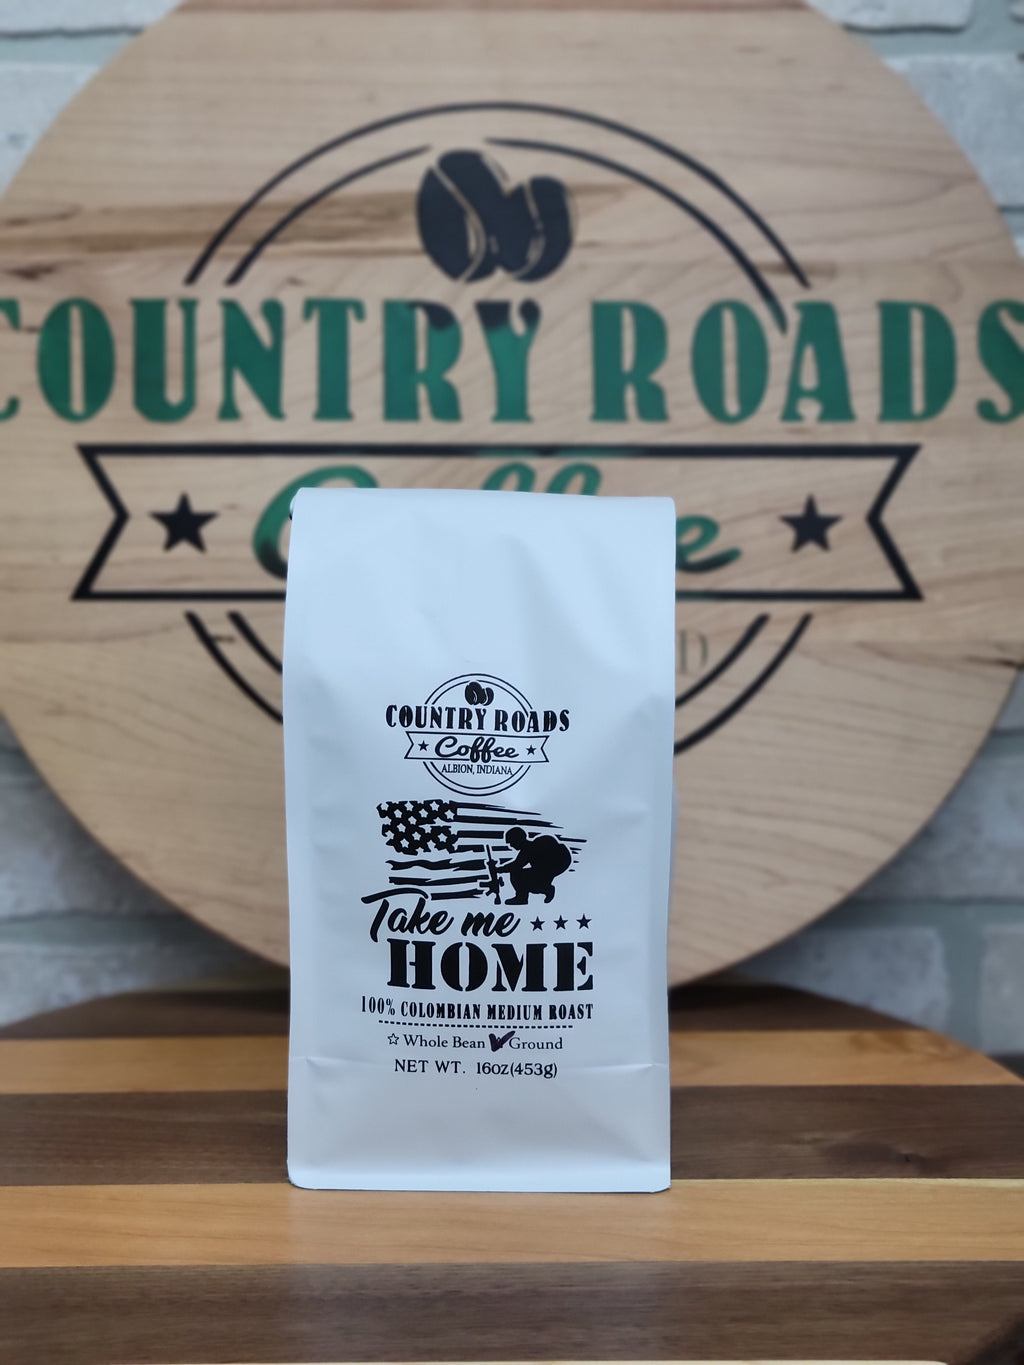 this is an image of our medium roast Colombian coffee called TAKE ME HOME